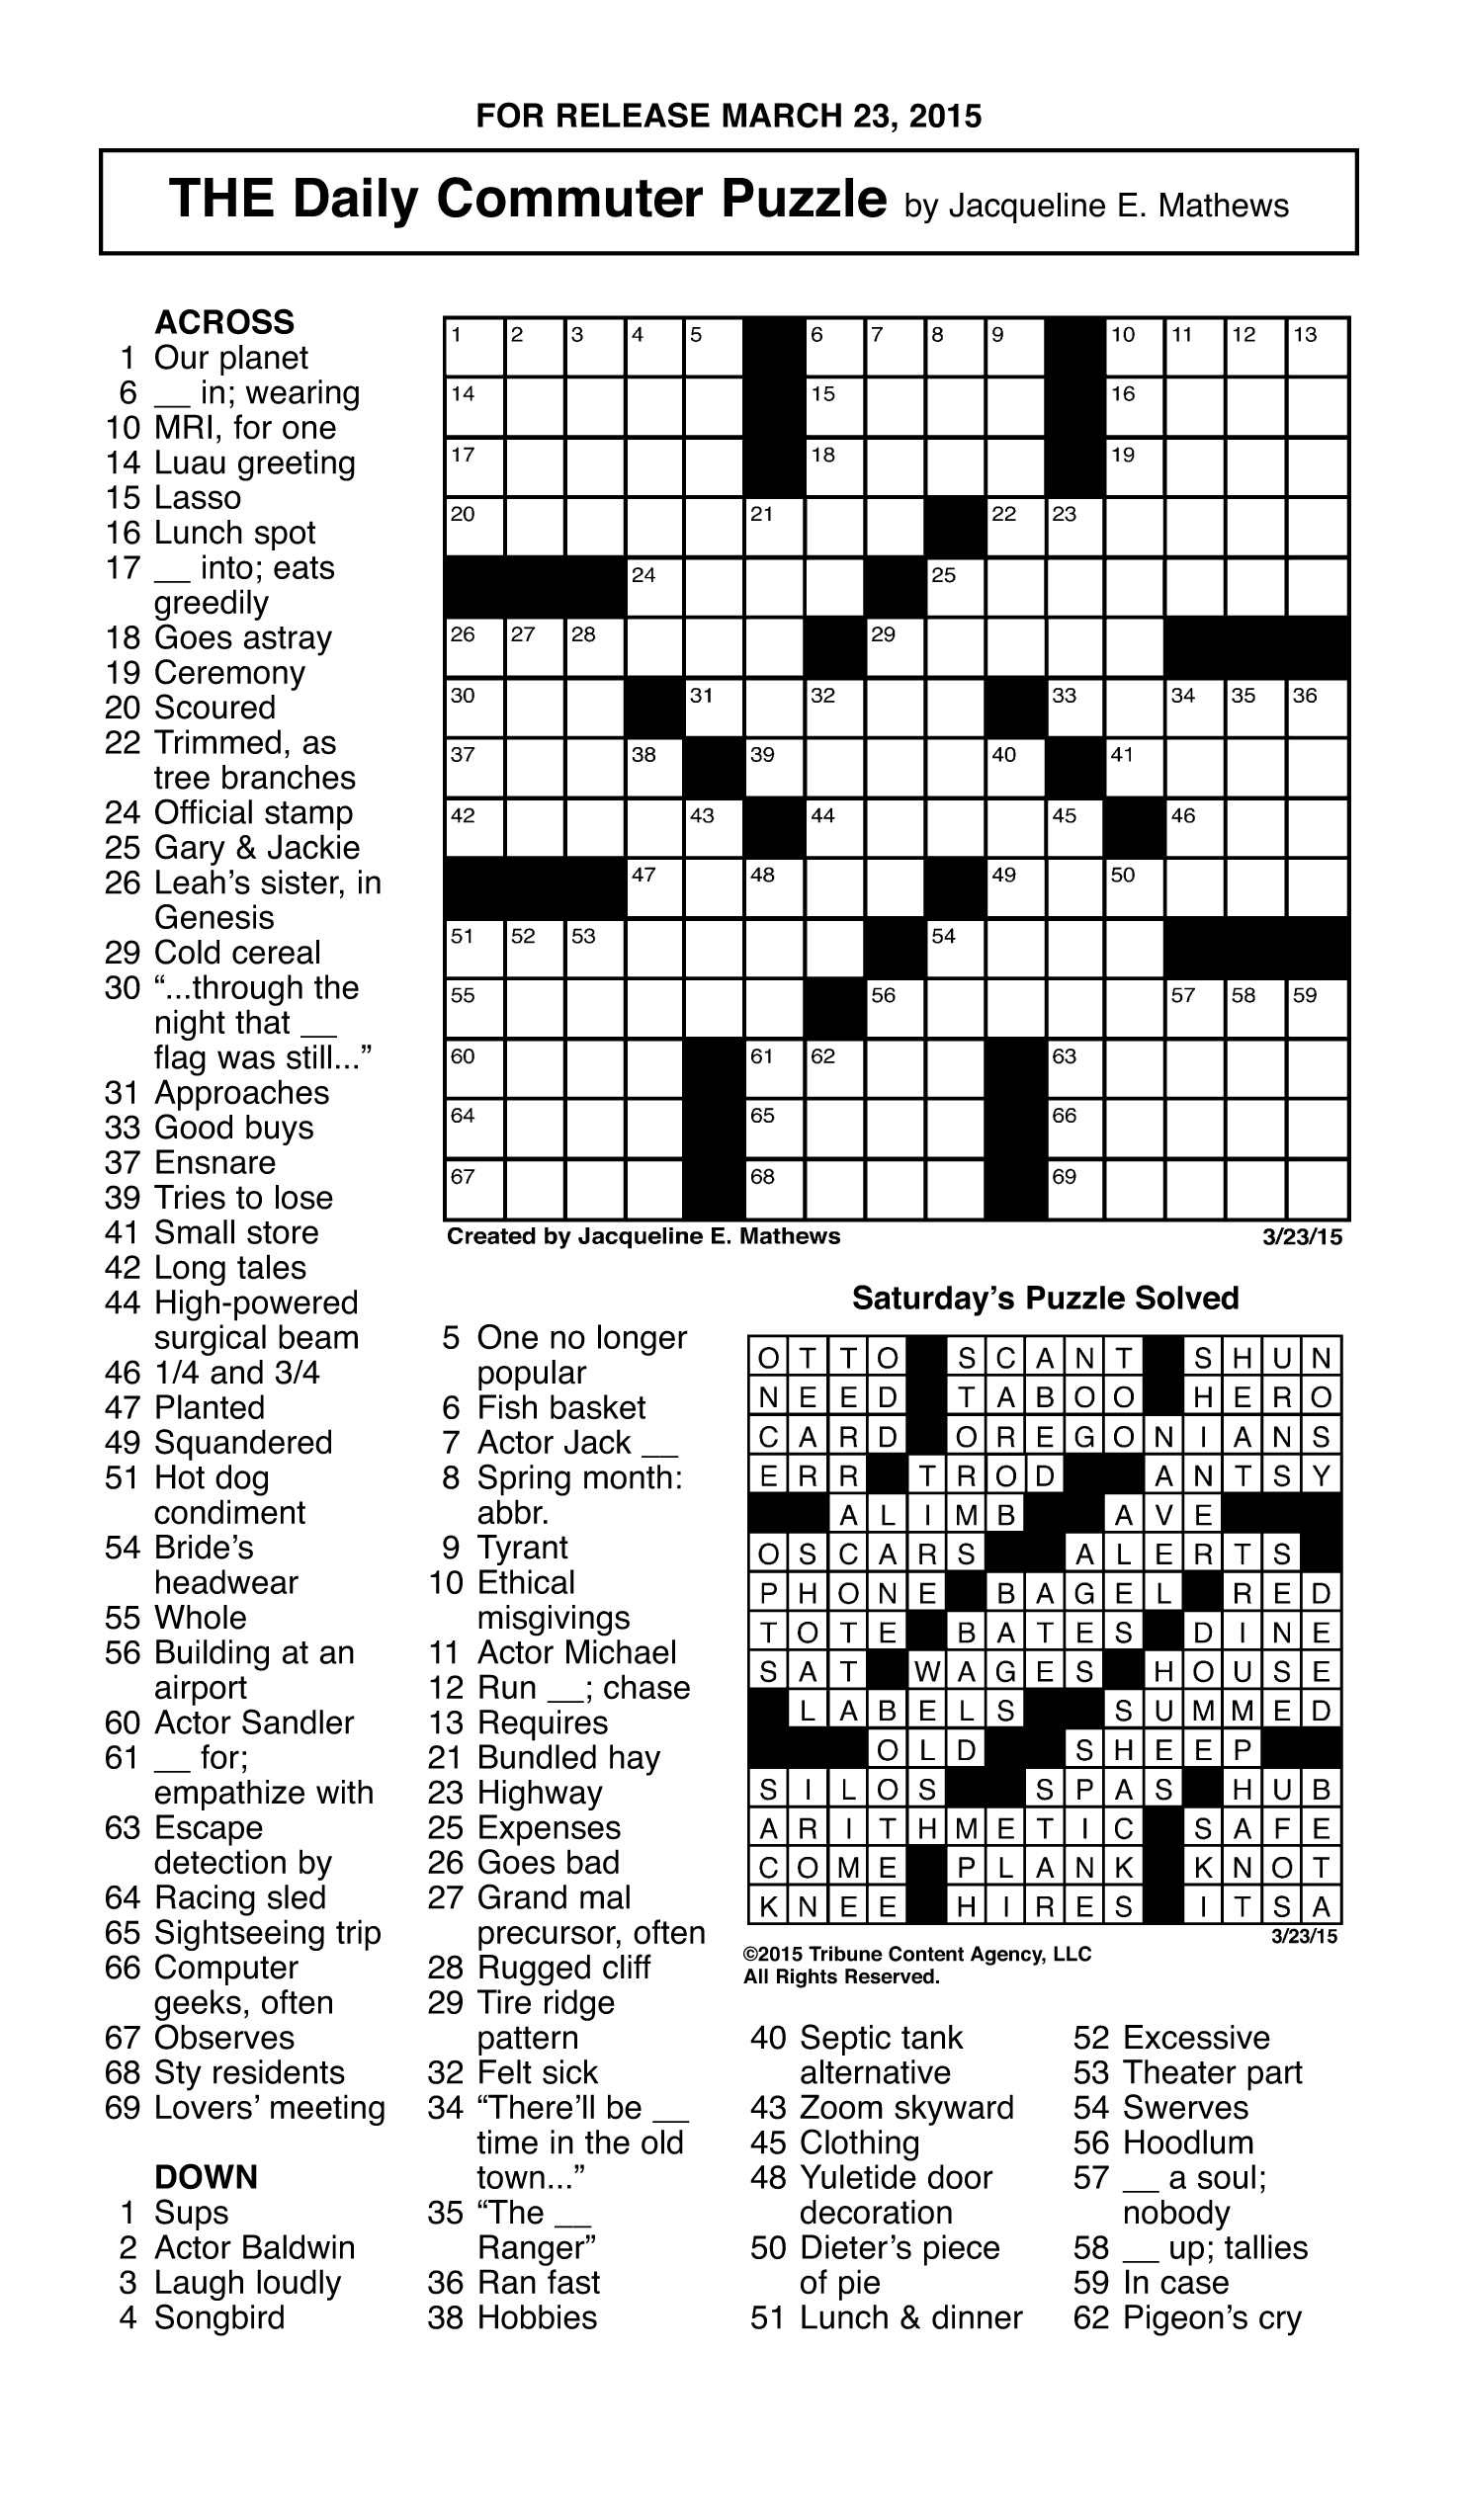 Sample Of THE Daily Commuter Puzzle Tribune Content Agency March 23